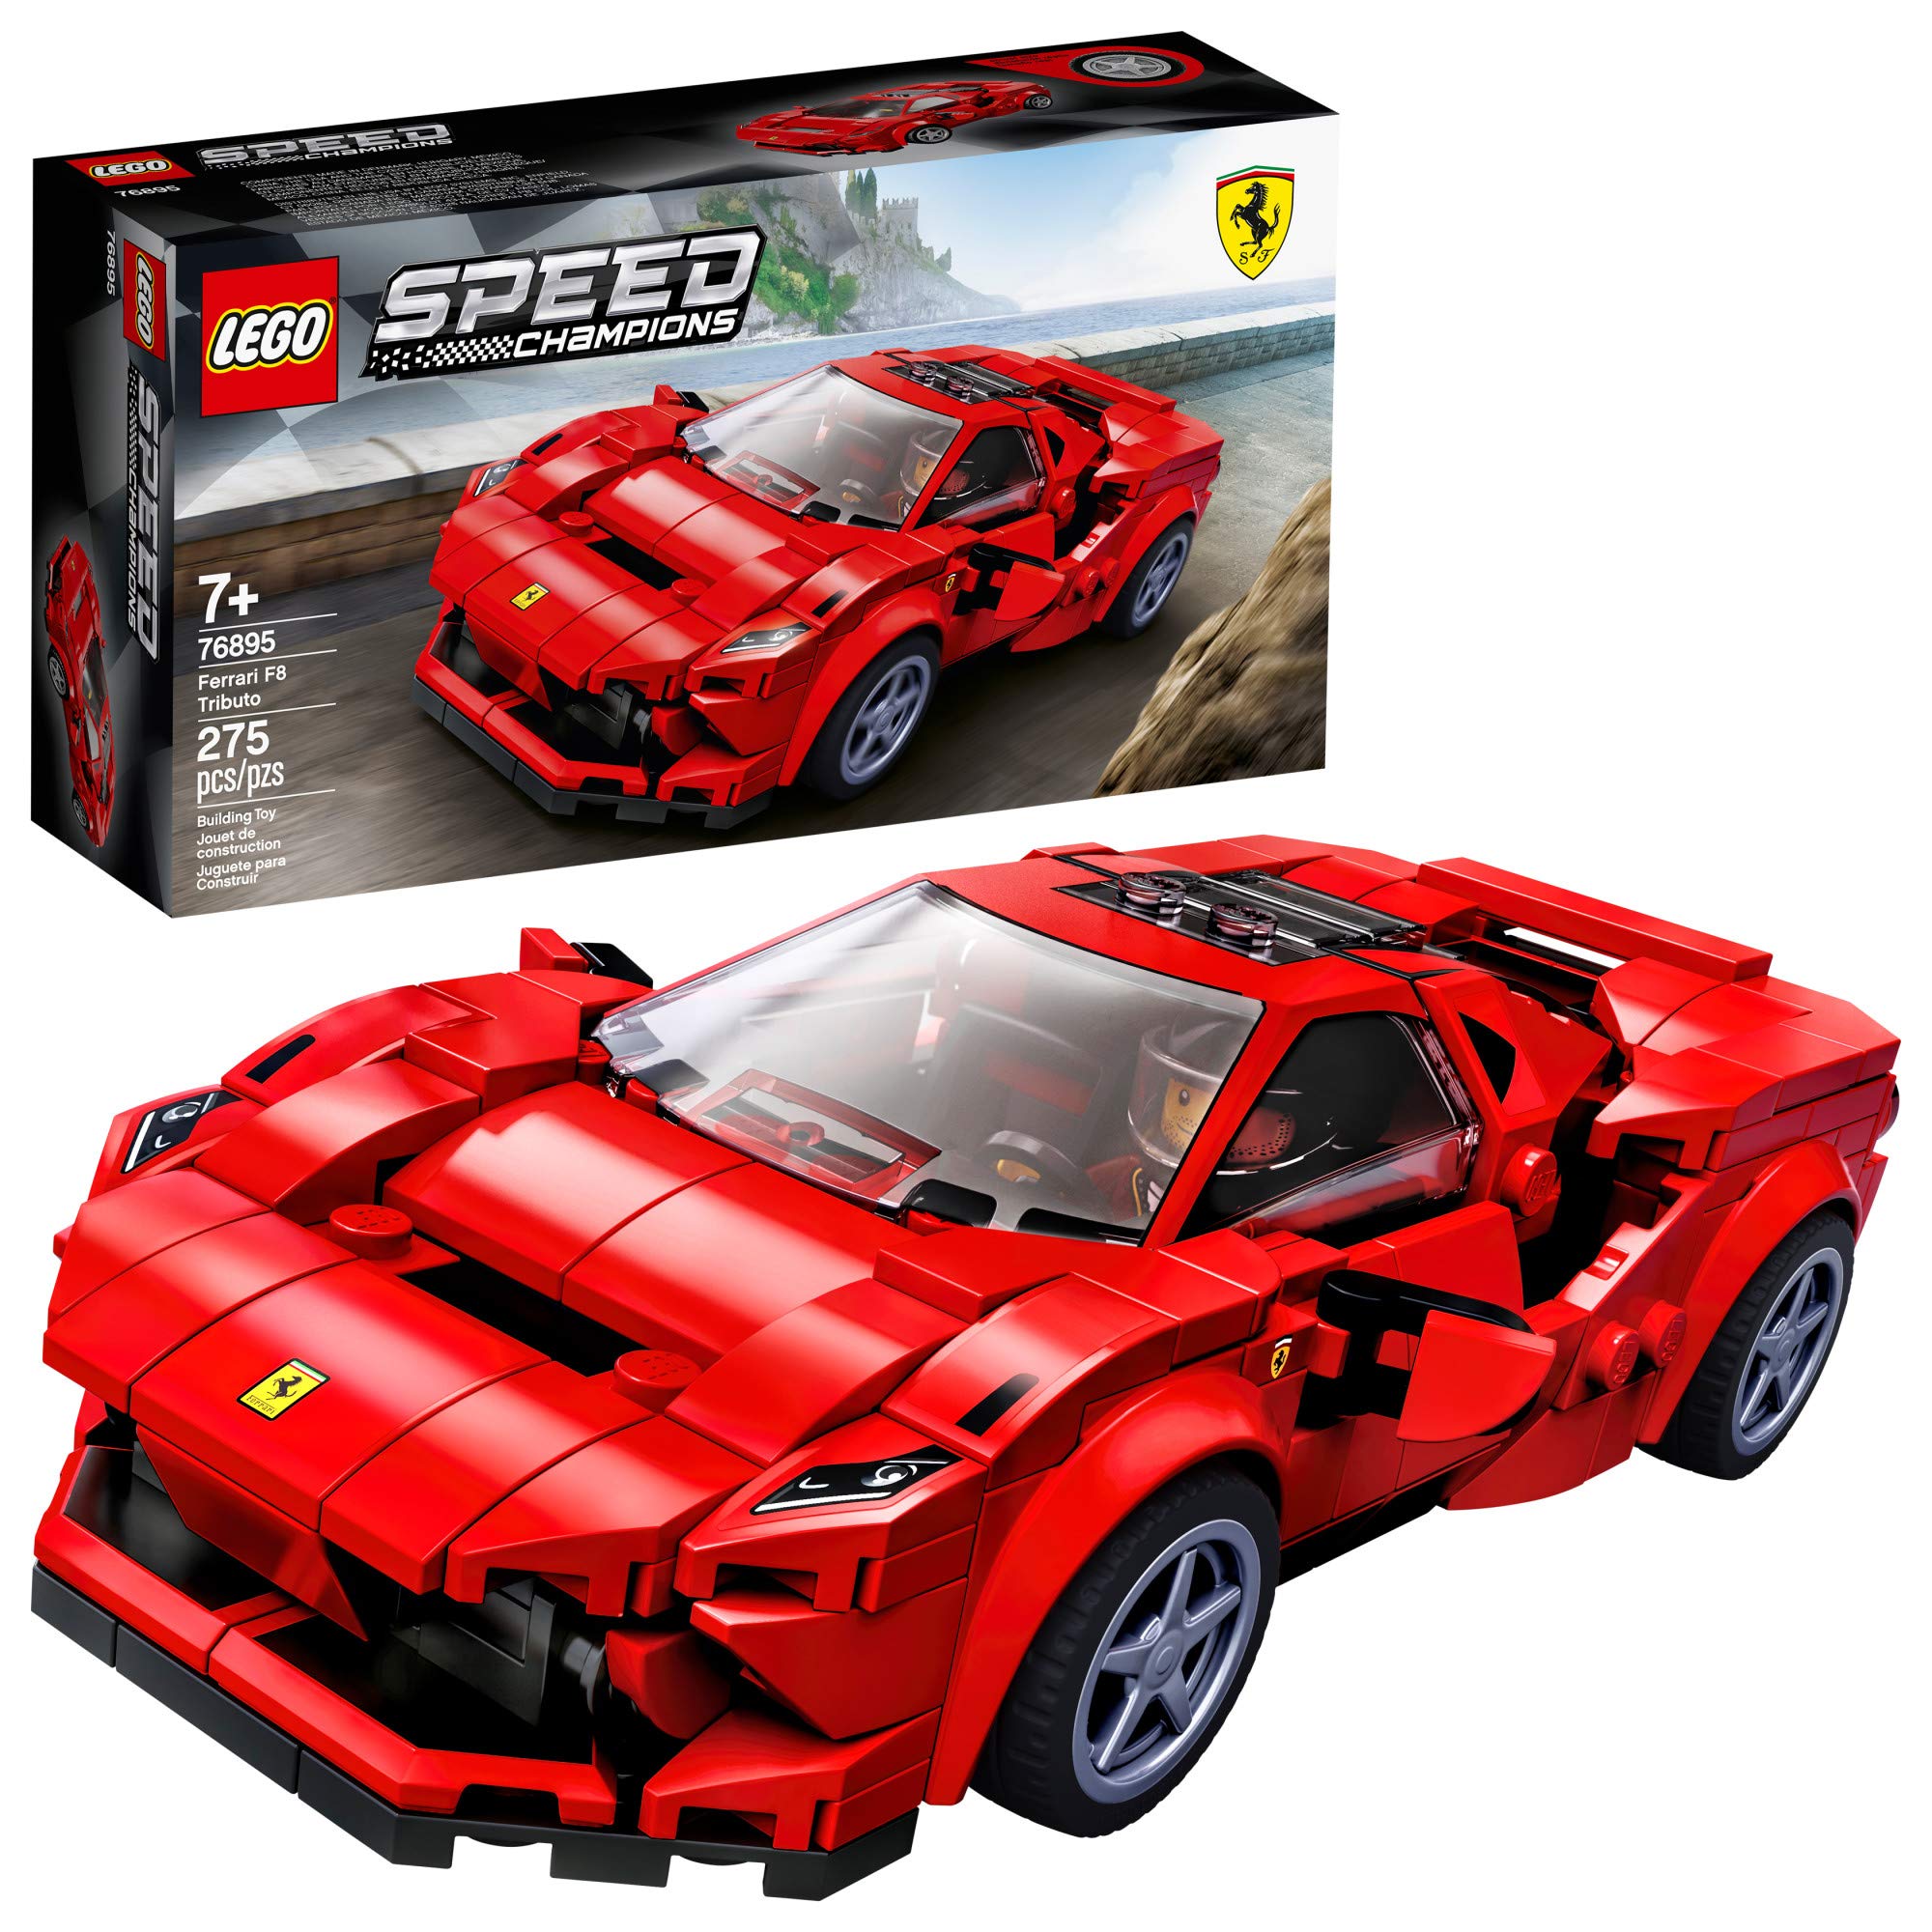 LEGO Speed Champions 76895 Ferrari F8 Tributo Toy Cars for Kids, Building Kit Featuring Minifigure (275 Pieces) (Like New, Open Box)